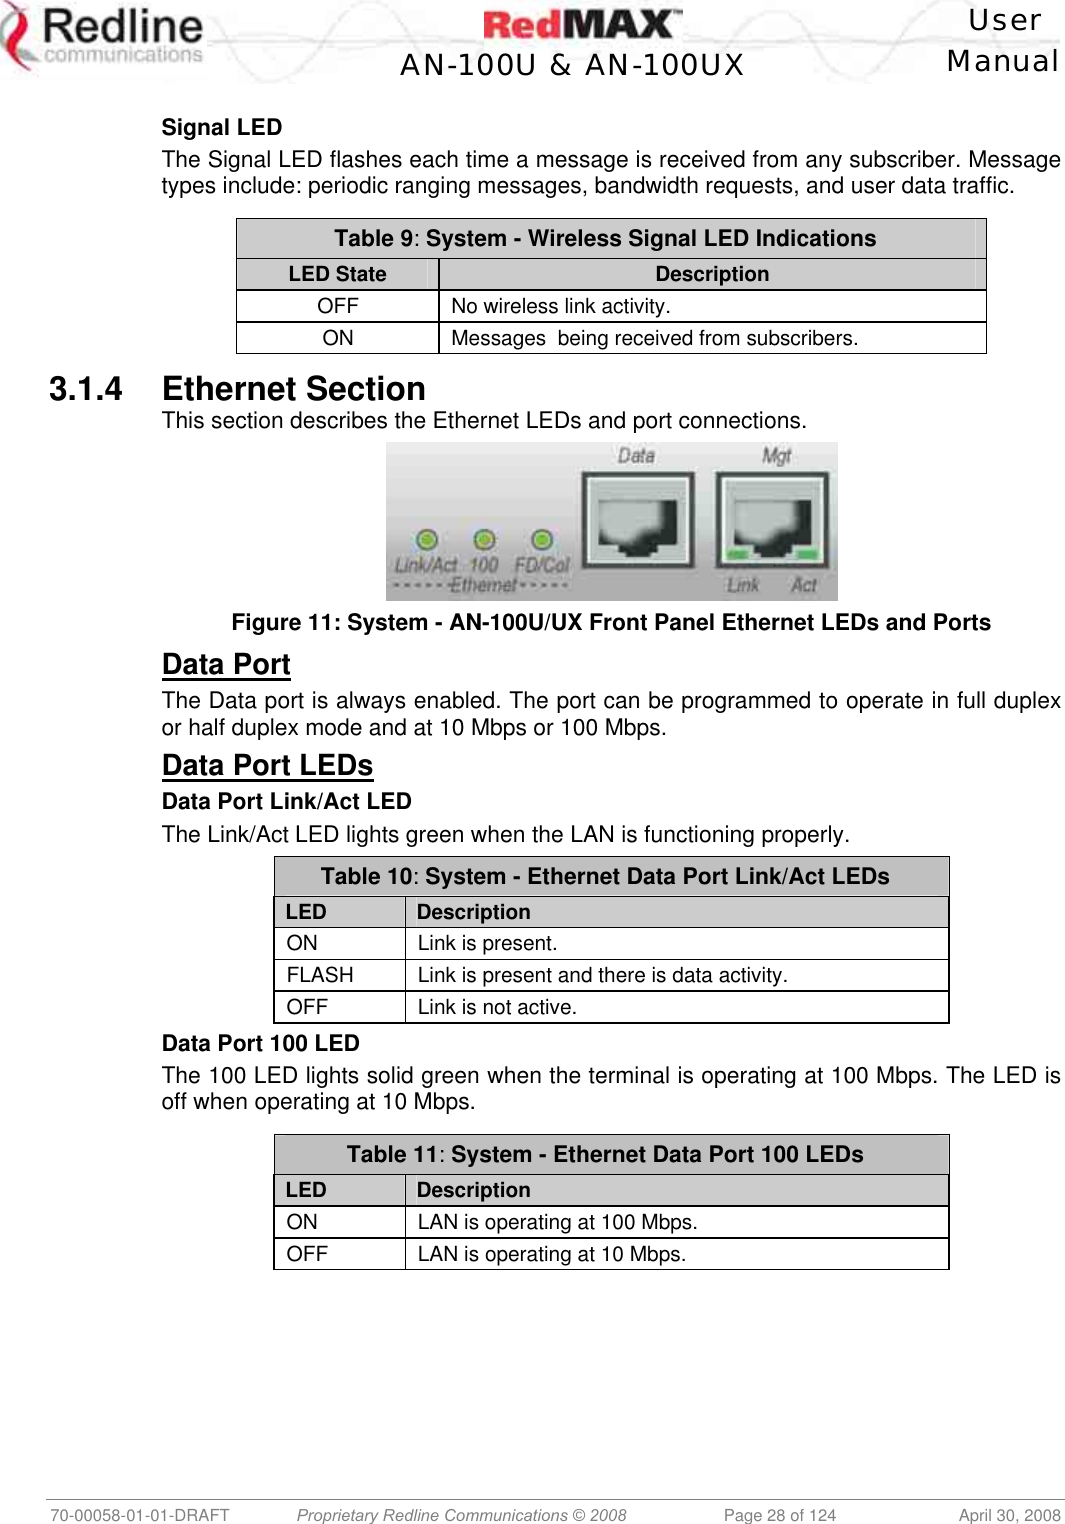    User  AN-100U &amp; AN-100UX Manual   70-00058-01-01-DRAFT  Proprietary Redline Communications © 2008   Page 28 of 124  April 30, 2008  Signal LED The Signal LED flashes each time a message is received from any subscriber. Message types include: periodic ranging messages, bandwidth requests, and user data traffic.  Table 9: System - Wireless Signal LED Indications LED State  Description OFF  No wireless link activity. ON  Messages  being received from subscribers.  3.1.4 Ethernet Section This section describes the Ethernet LEDs and port connections.  Figure 11: System - AN-100U/UX Front Panel Ethernet LEDs and Ports Data Port The Data port is always enabled. The port can be programmed to operate in full duplex or half duplex mode and at 10 Mbps or 100 Mbps. Data Port LEDs Data Port Link/Act LED The Link/Act LED lights green when the LAN is functioning properly. Table 10: System - Ethernet Data Port Link/Act LEDs  LED  Description ON  Link is present. FLASH  Link is present and there is data activity. OFF  Link is not active. Data Port 100 LED The 100 LED lights solid green when the terminal is operating at 100 Mbps. The LED is off when operating at 10 Mbps.   Table 11: System - Ethernet Data Port 100 LEDs LED  Description ON  LAN is operating at 100 Mbps. OFF  LAN is operating at 10 Mbps.  